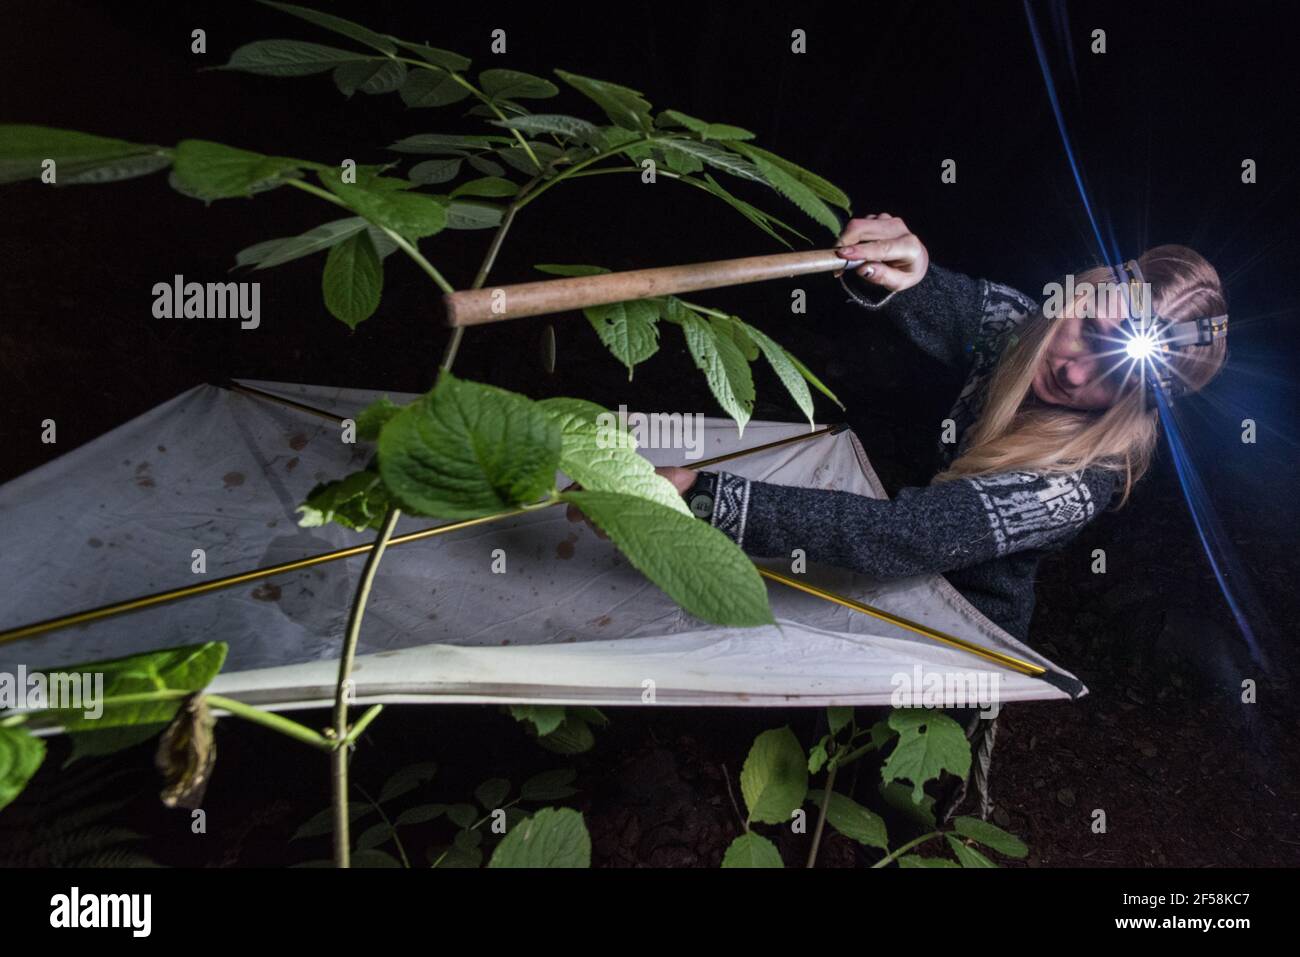 A female field scientist shaking vegetation to drop insects and other invertebrates into the beating tray below, a common method of insect sampling. Stock Photo